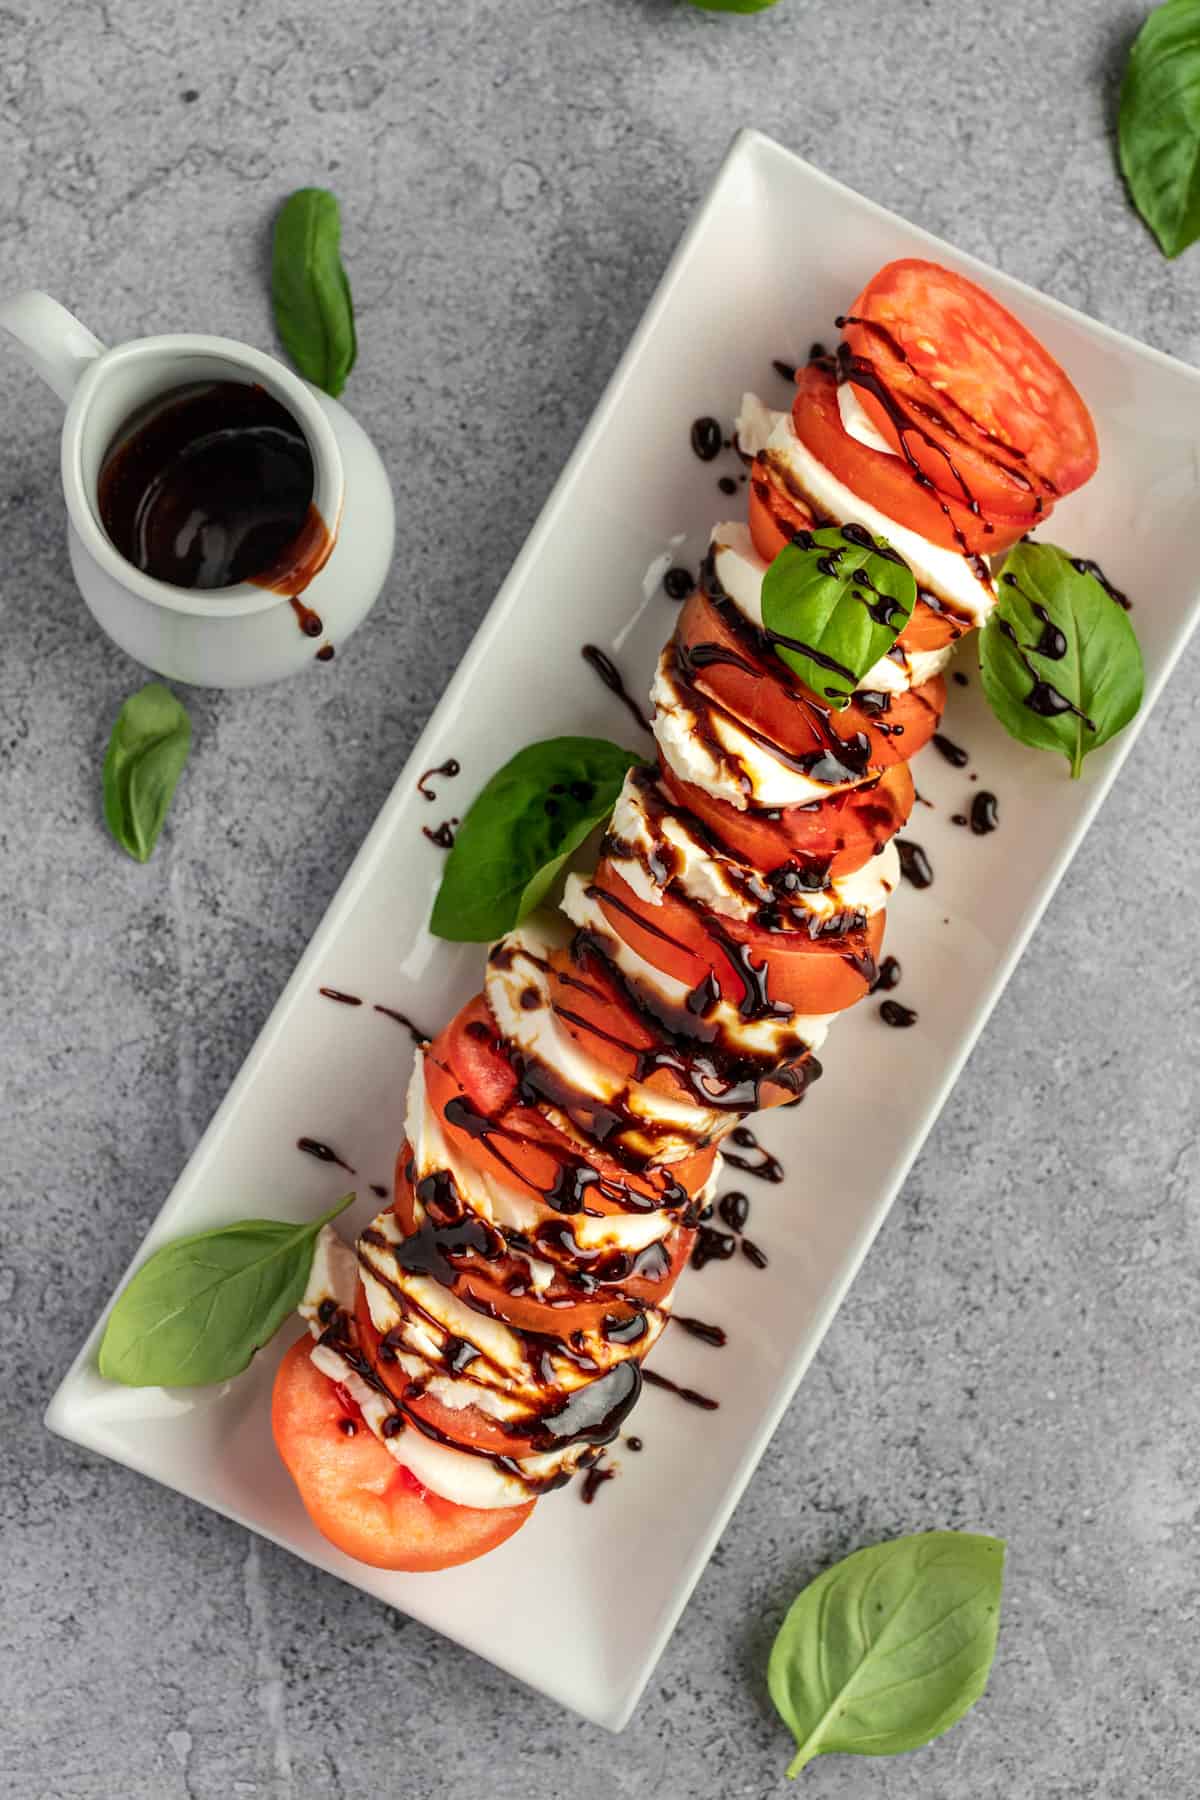 Overhead view of tomatoes and mozzarella drizzled with balsamic glaze for caprese salad.